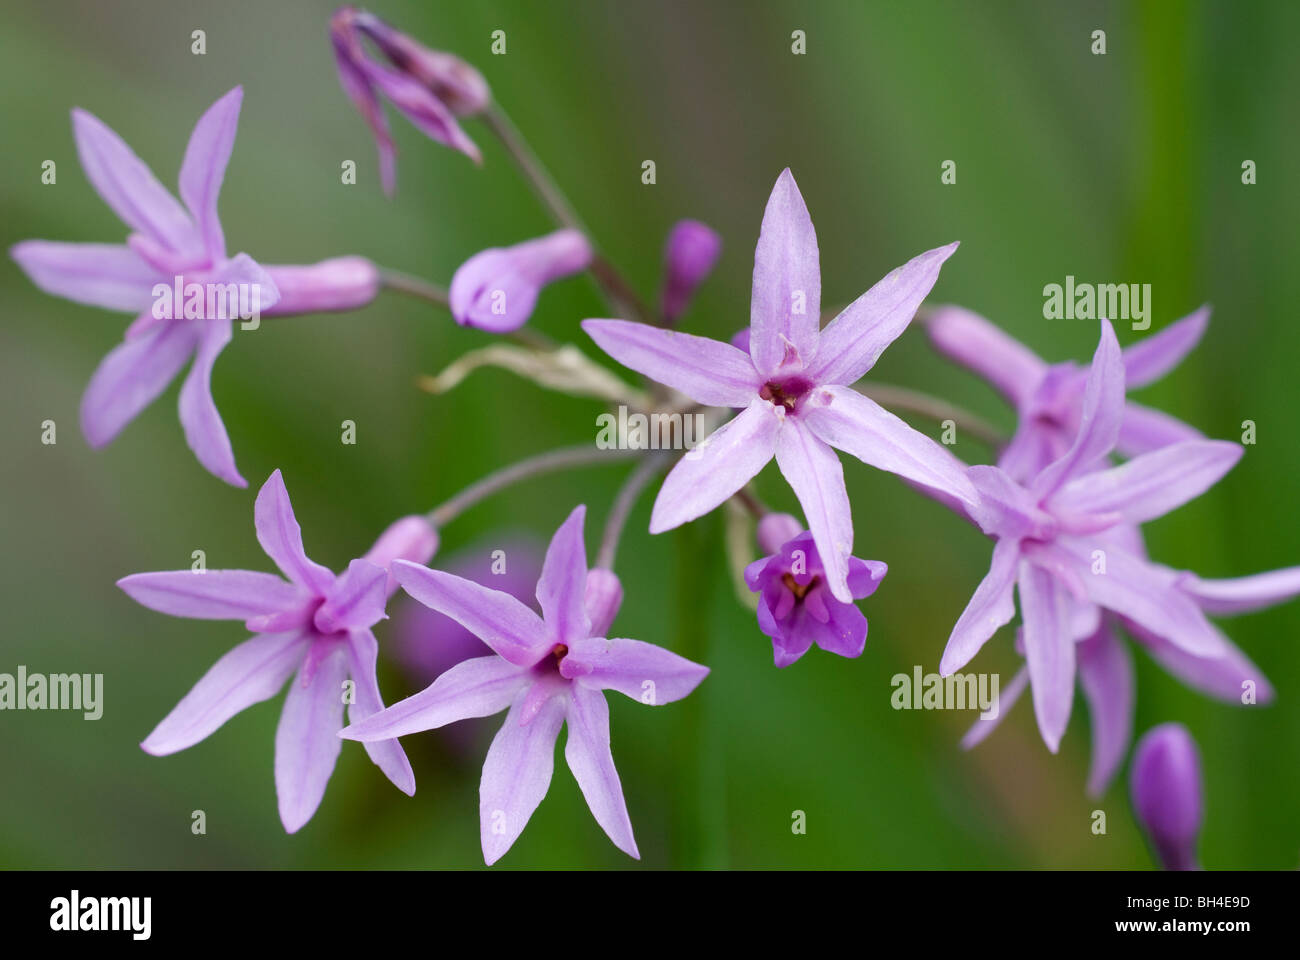 Close-up image of Tulbaghia simmleri flowers against a soft green background in garden. Stock Photo